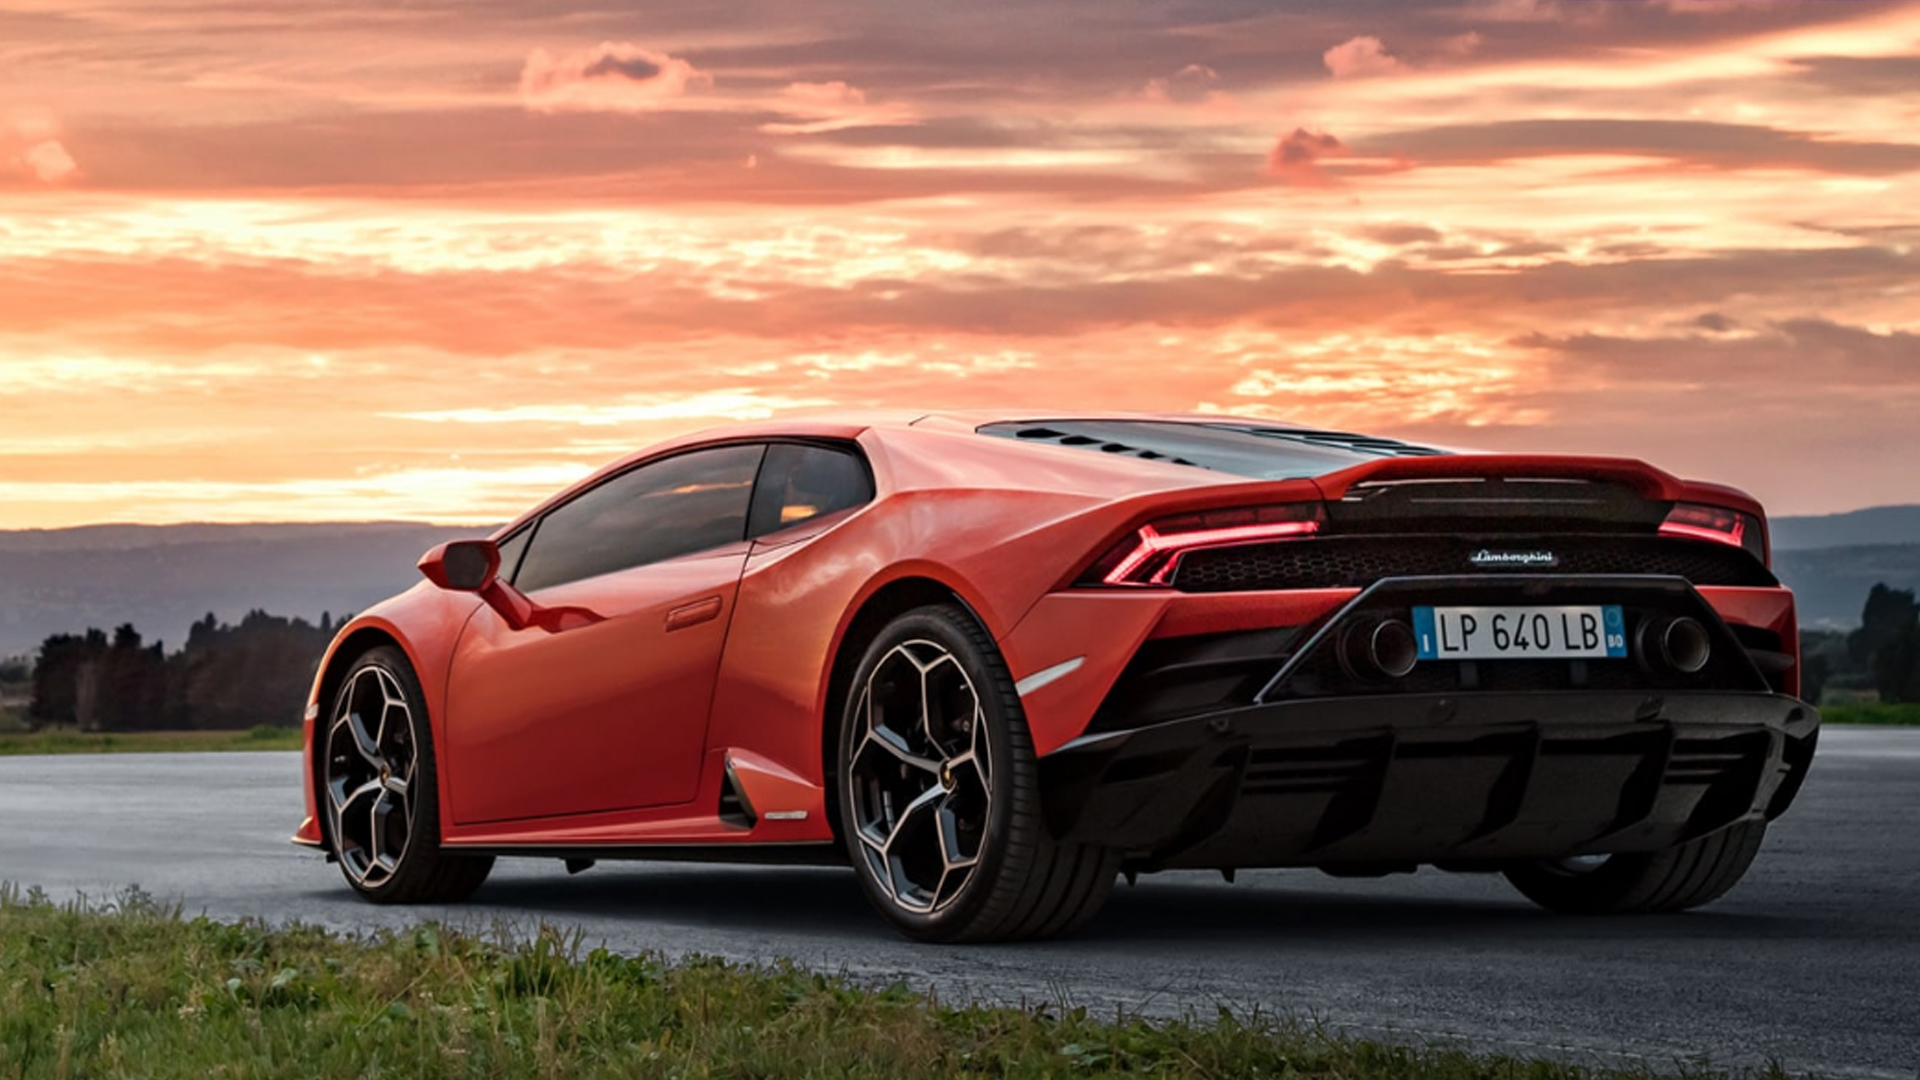 Lamborghini Huracan 2020 Price Mileage Reviews Specification Gallery Overdrive